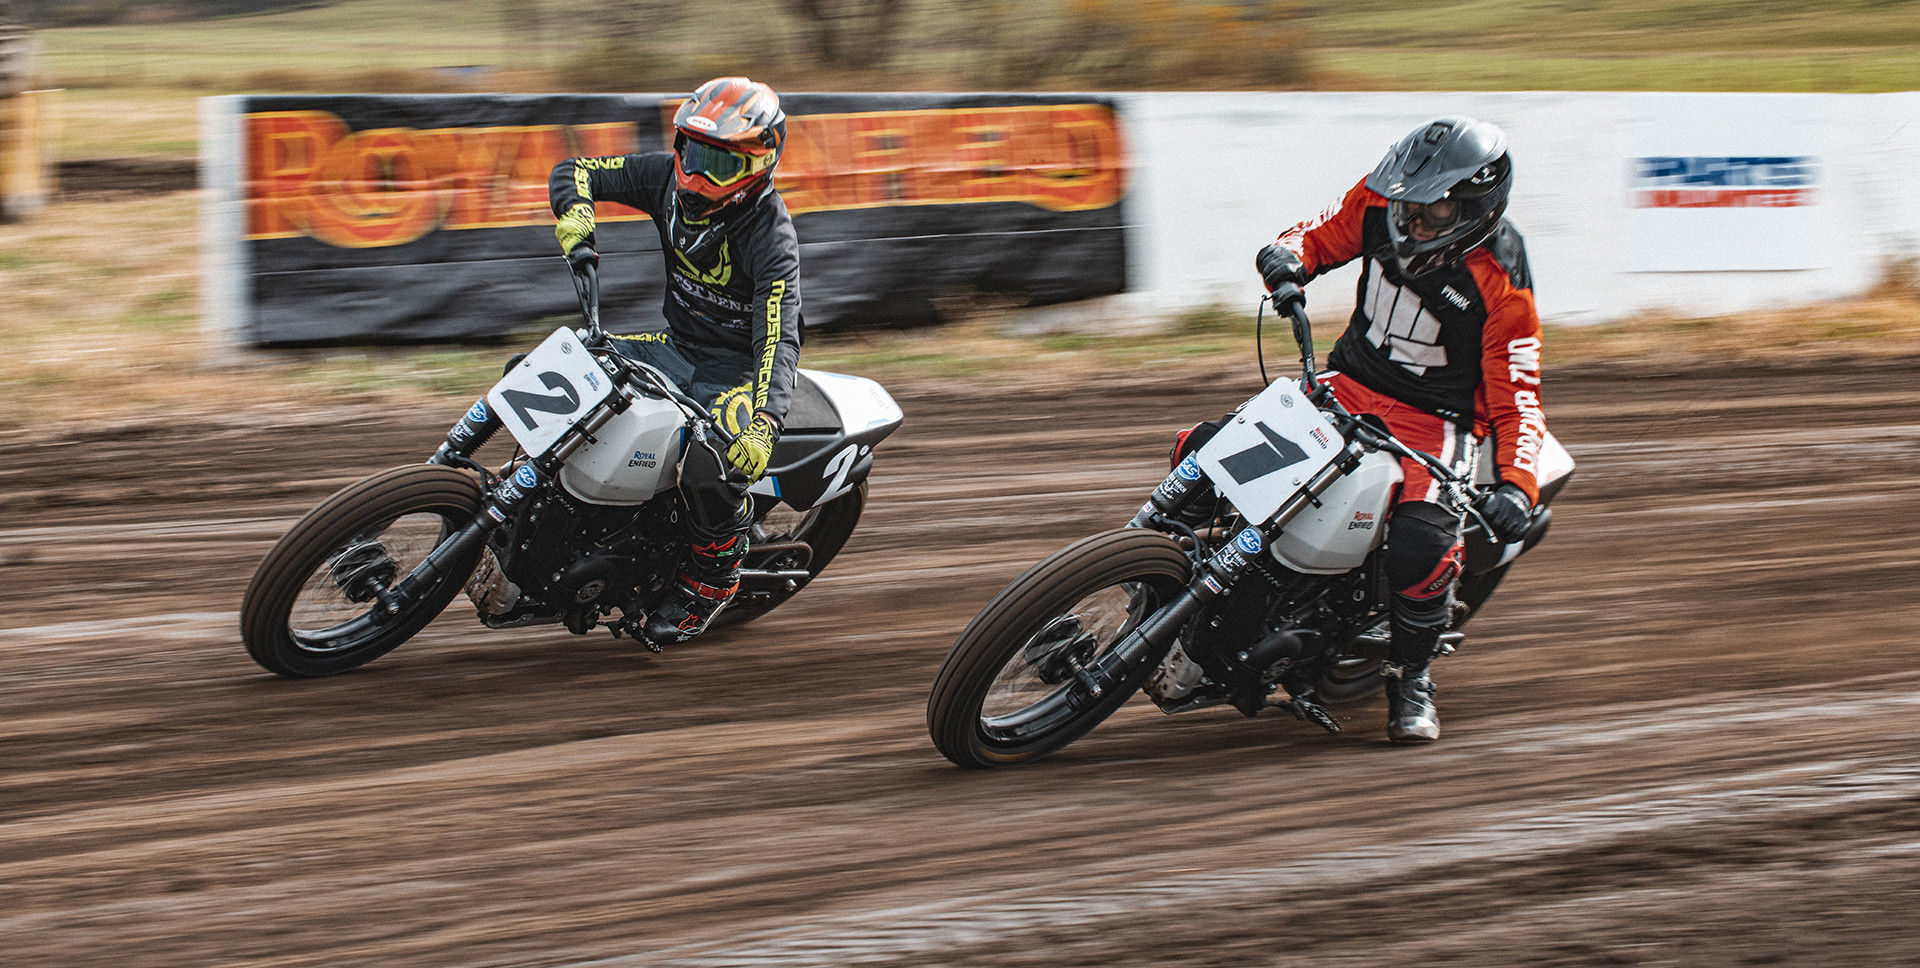 Riders in action on the new Royal Enfield FT411, which will be used at the Slide School. Photo courtesy Royal Enfield North America.